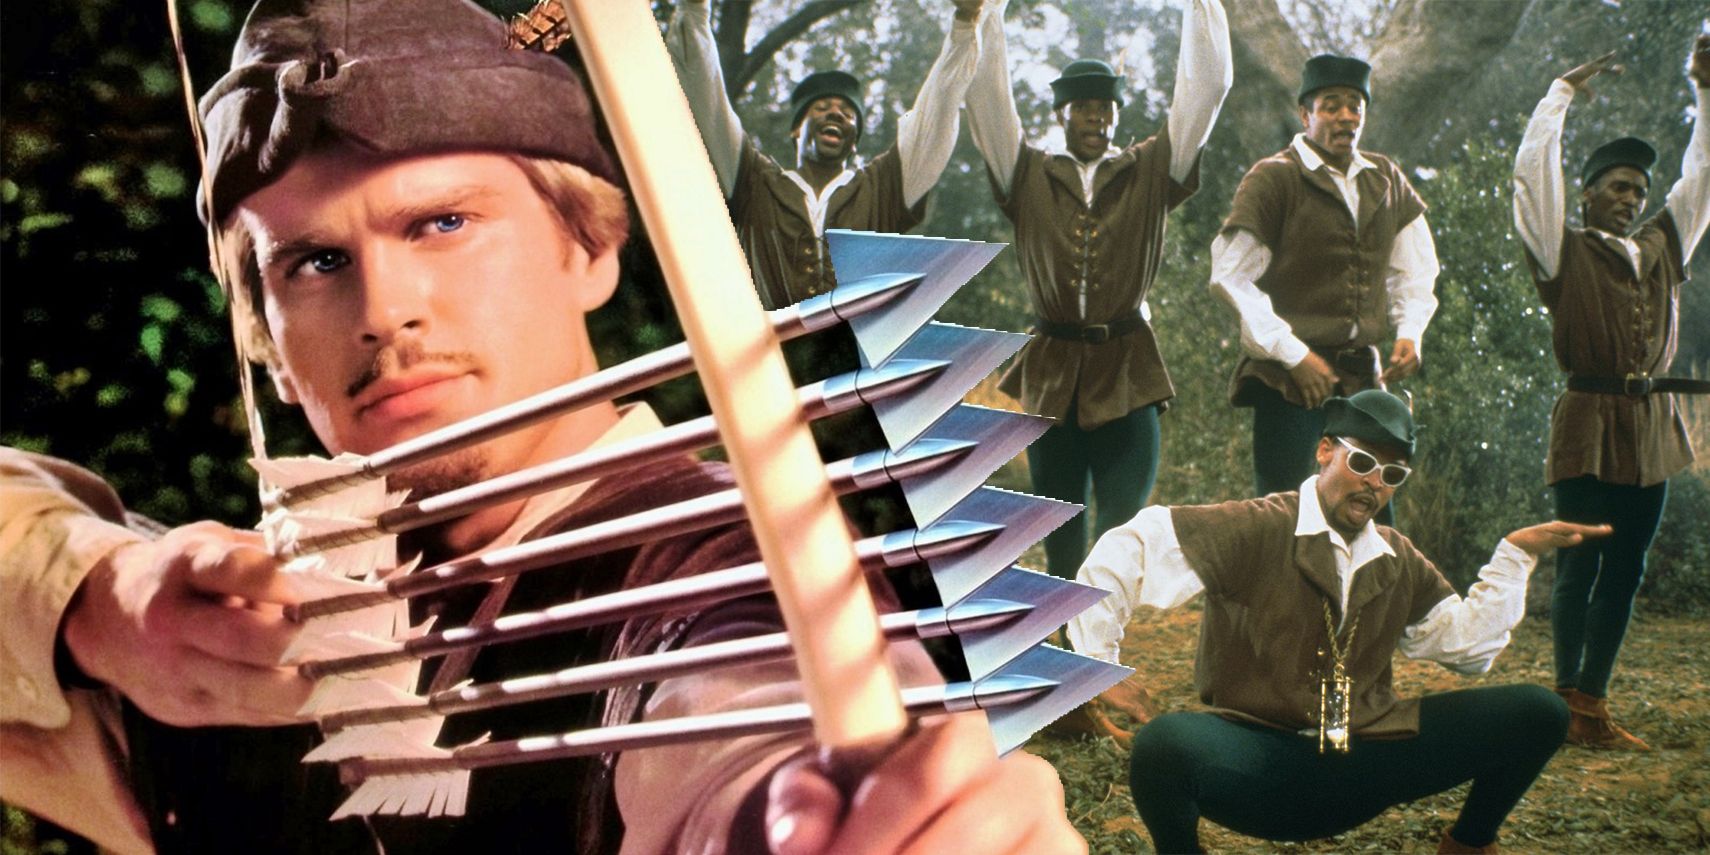 Split image of Robin Hood pointing his arrow and the Merry Men singing